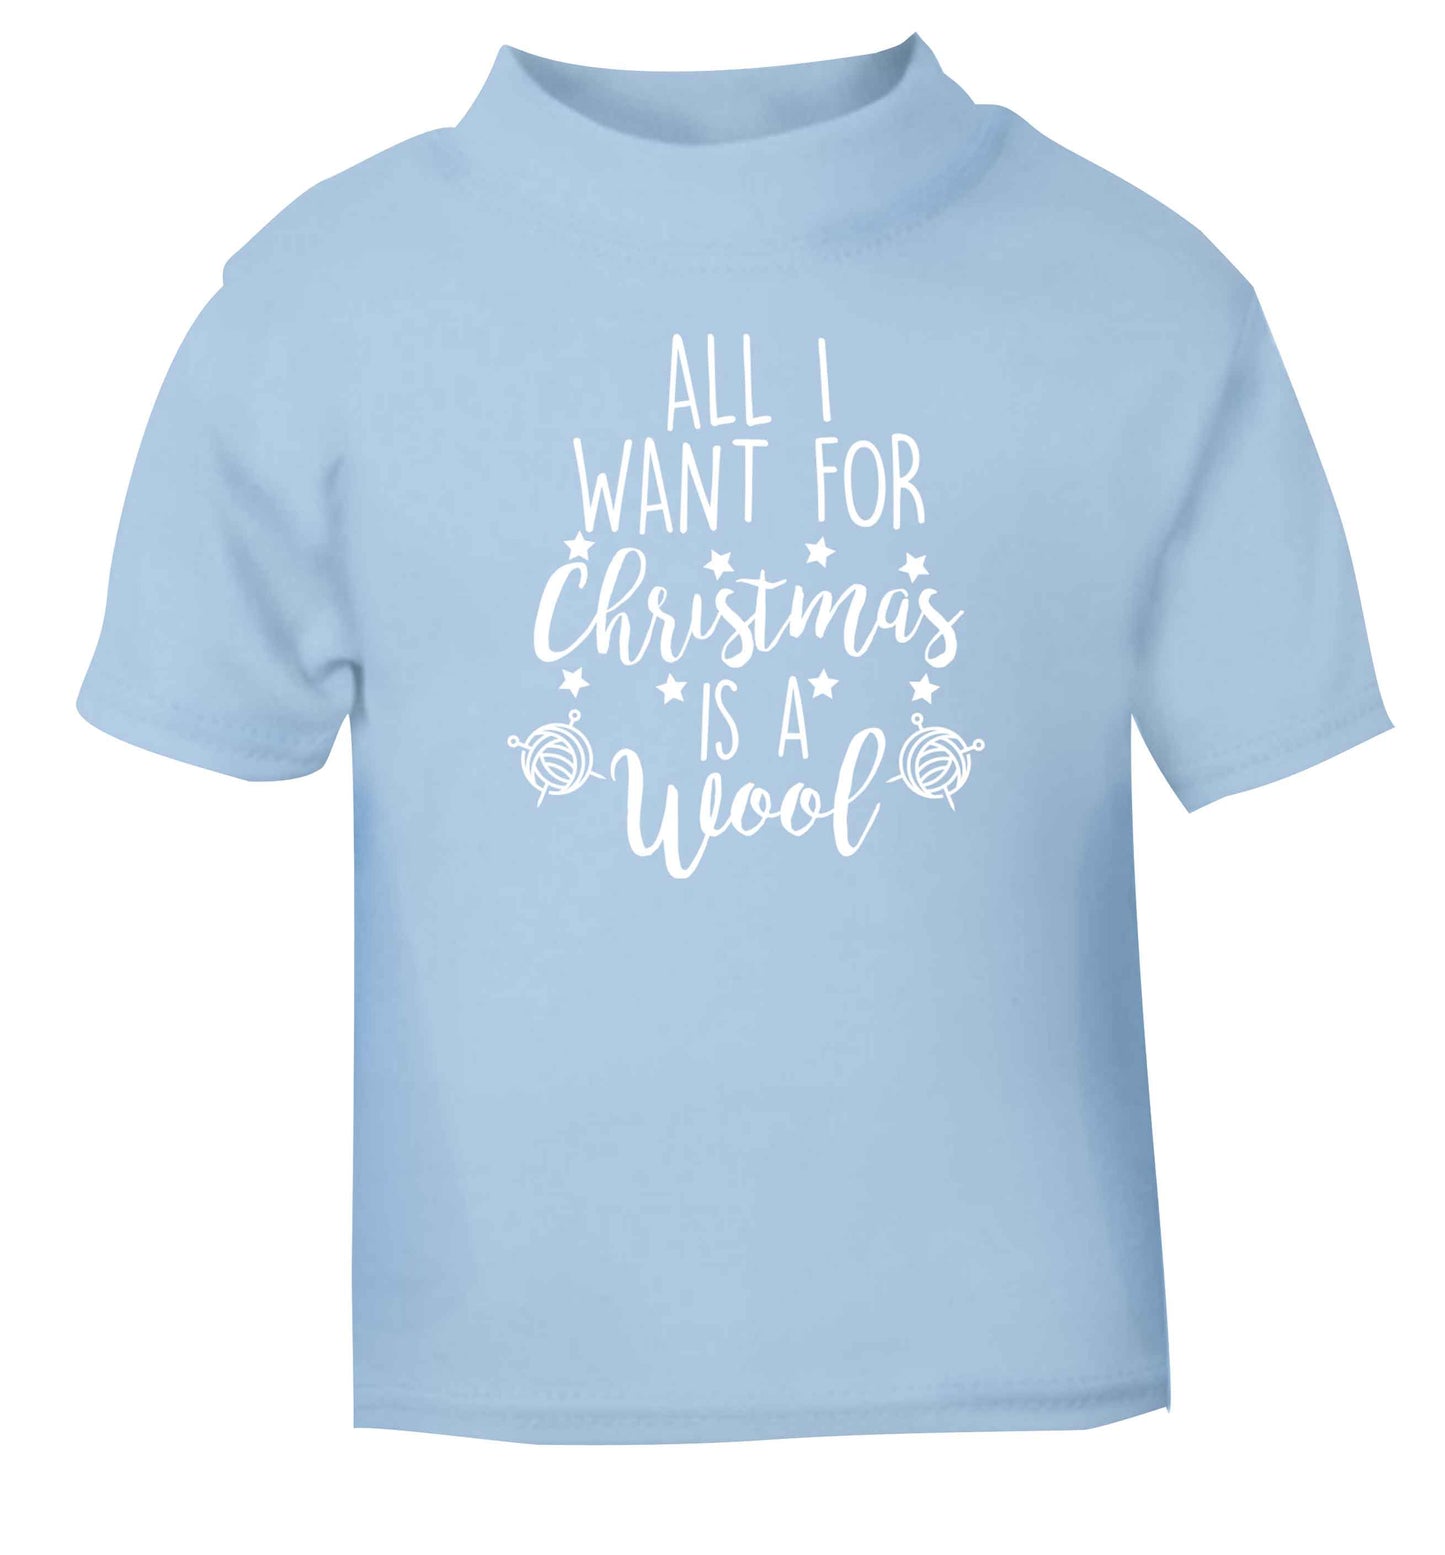 All I want for Christmas is wool! light blue Baby Toddler Tshirt 2 Years